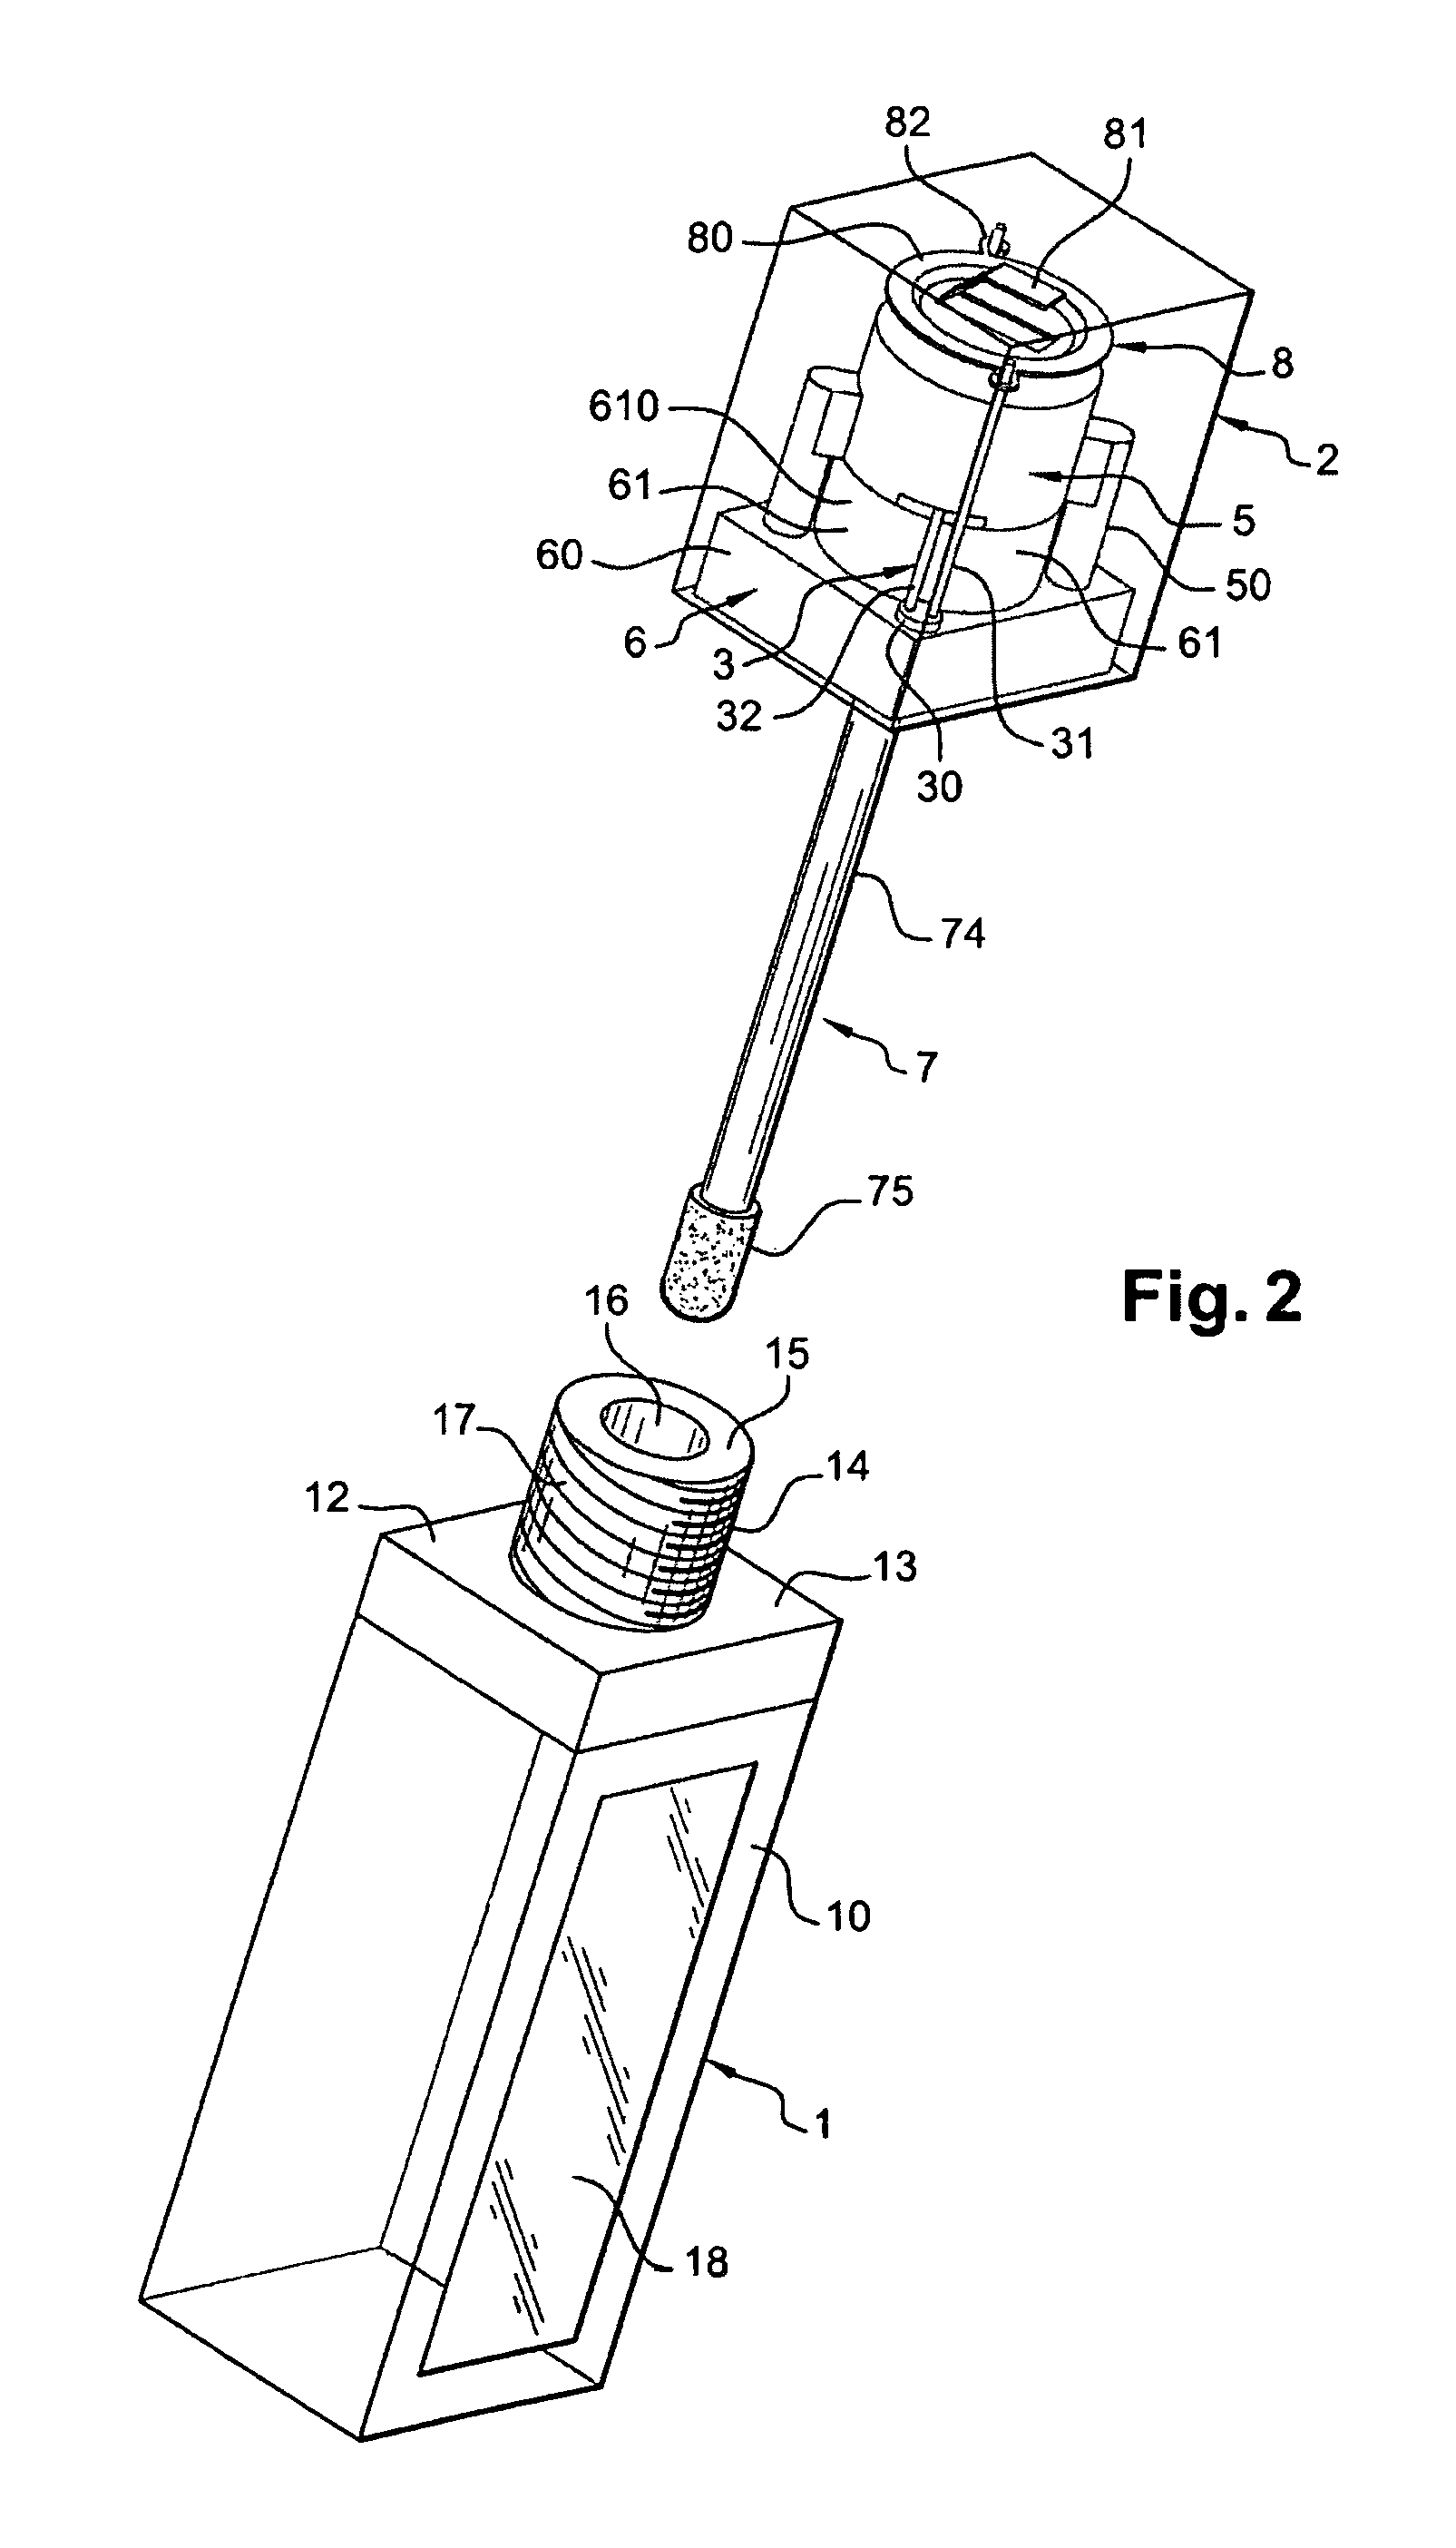 Device for dispensing a cosmetic and/or care product